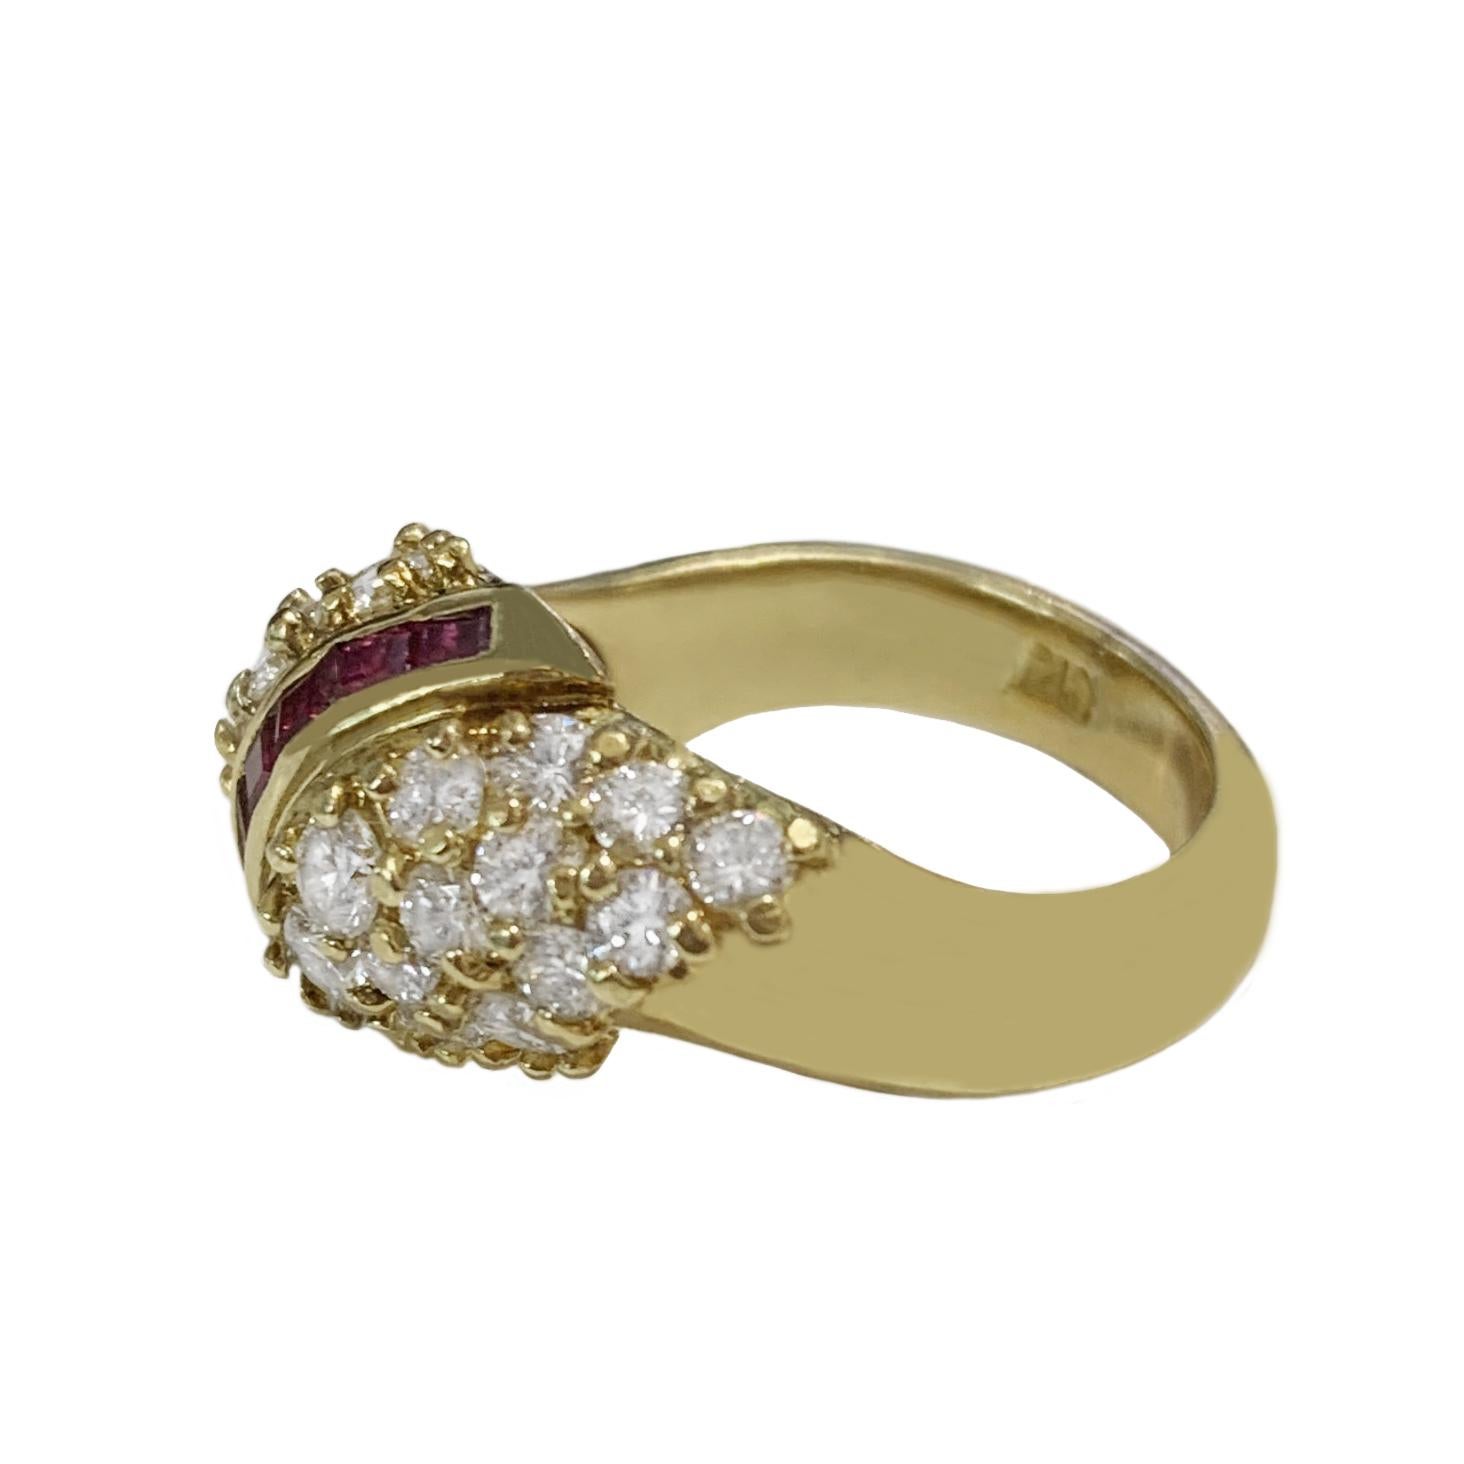 -Mint condition
-18k Yellow Gold
-Ring size: 5
-Diamonds: 1.00 ct
-Rubies: 0.5ct
-Comes with generic box